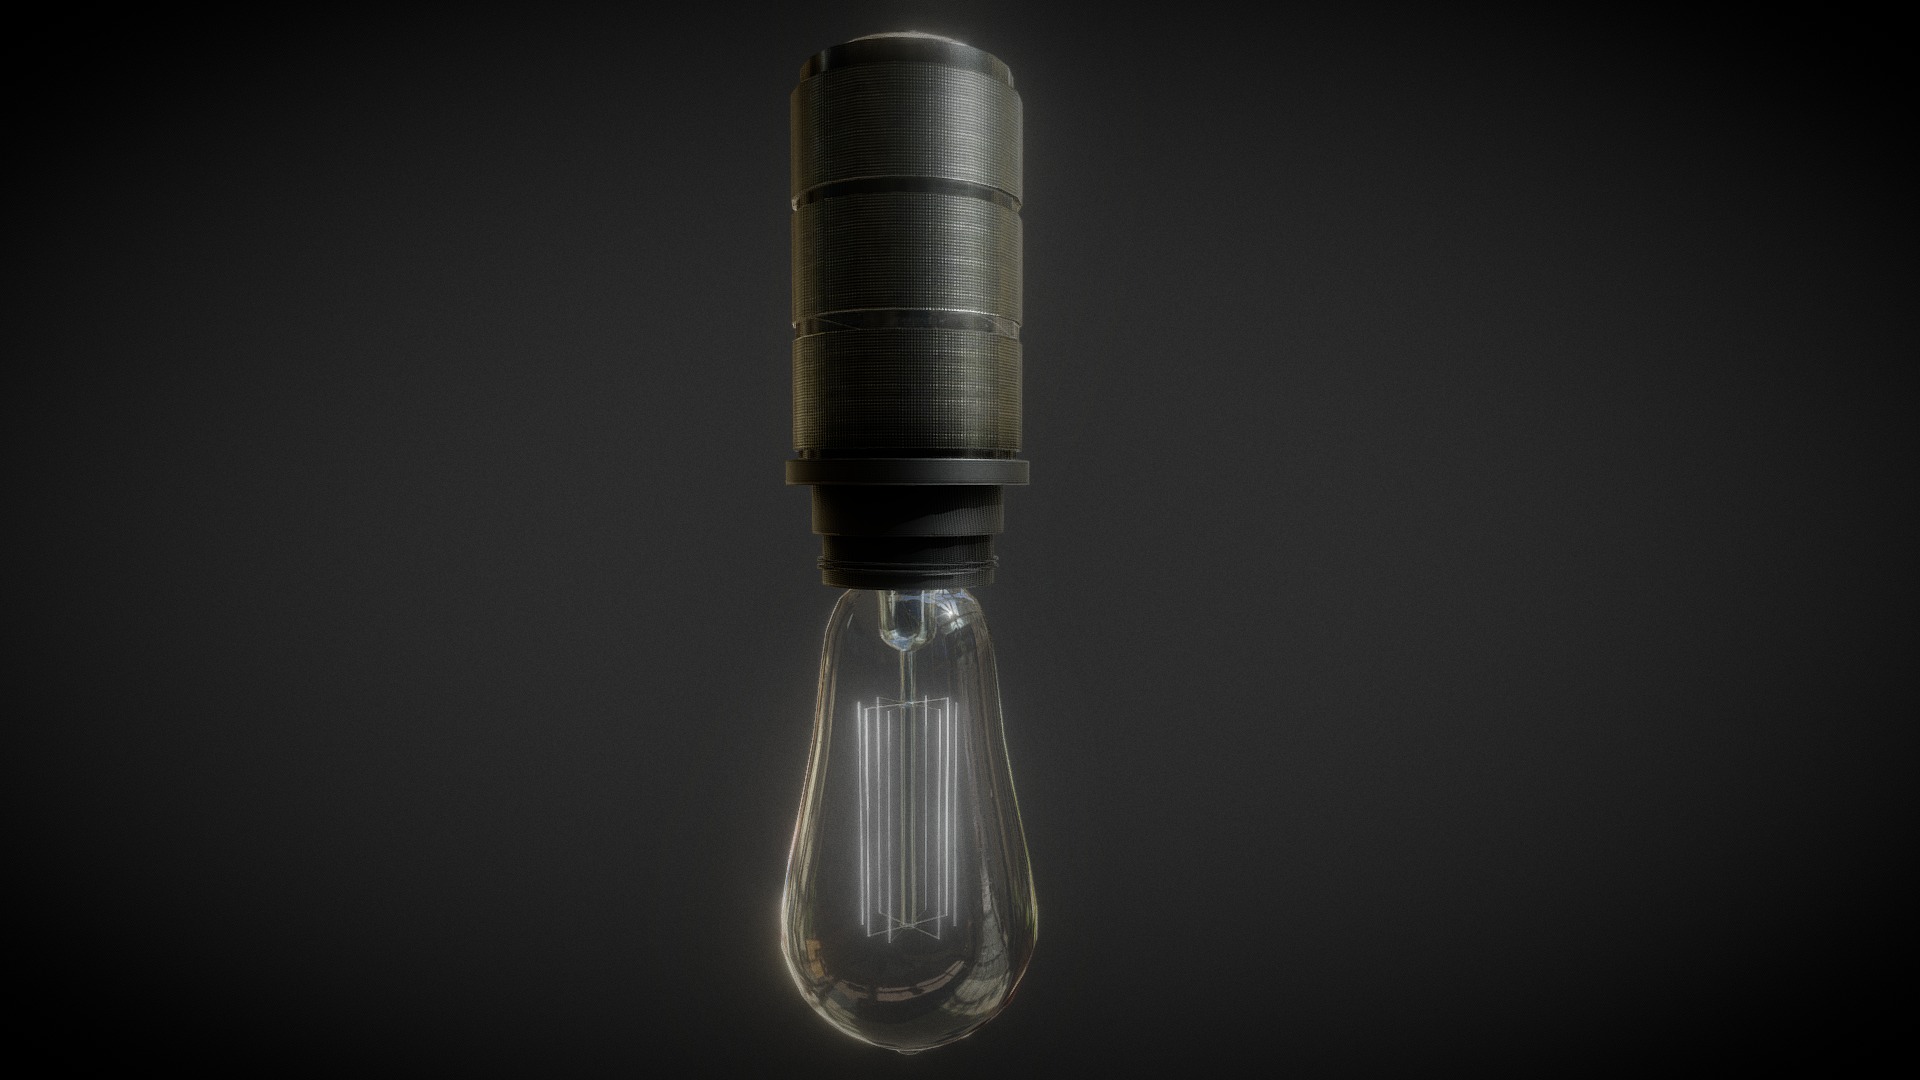 3D model Vintage Lump - This is a 3D model of the Vintage Lump. The 3D model is about a close-up of a light bulb.